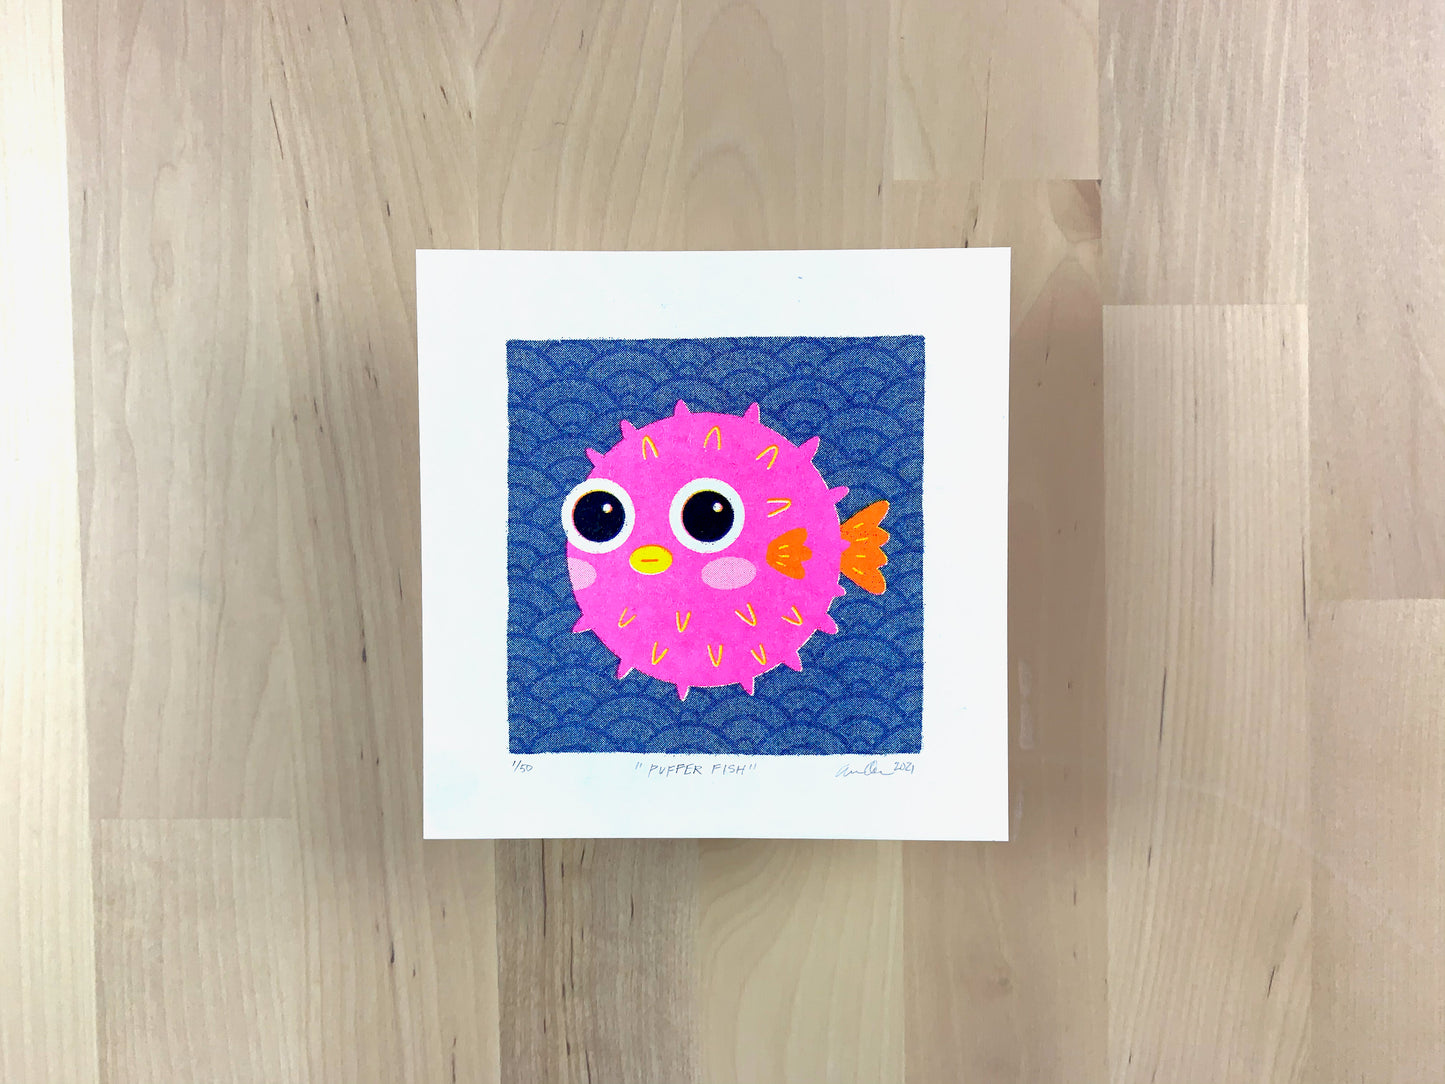 Risograph print of a cute pink pufferfish illustration on a wave pattern background.